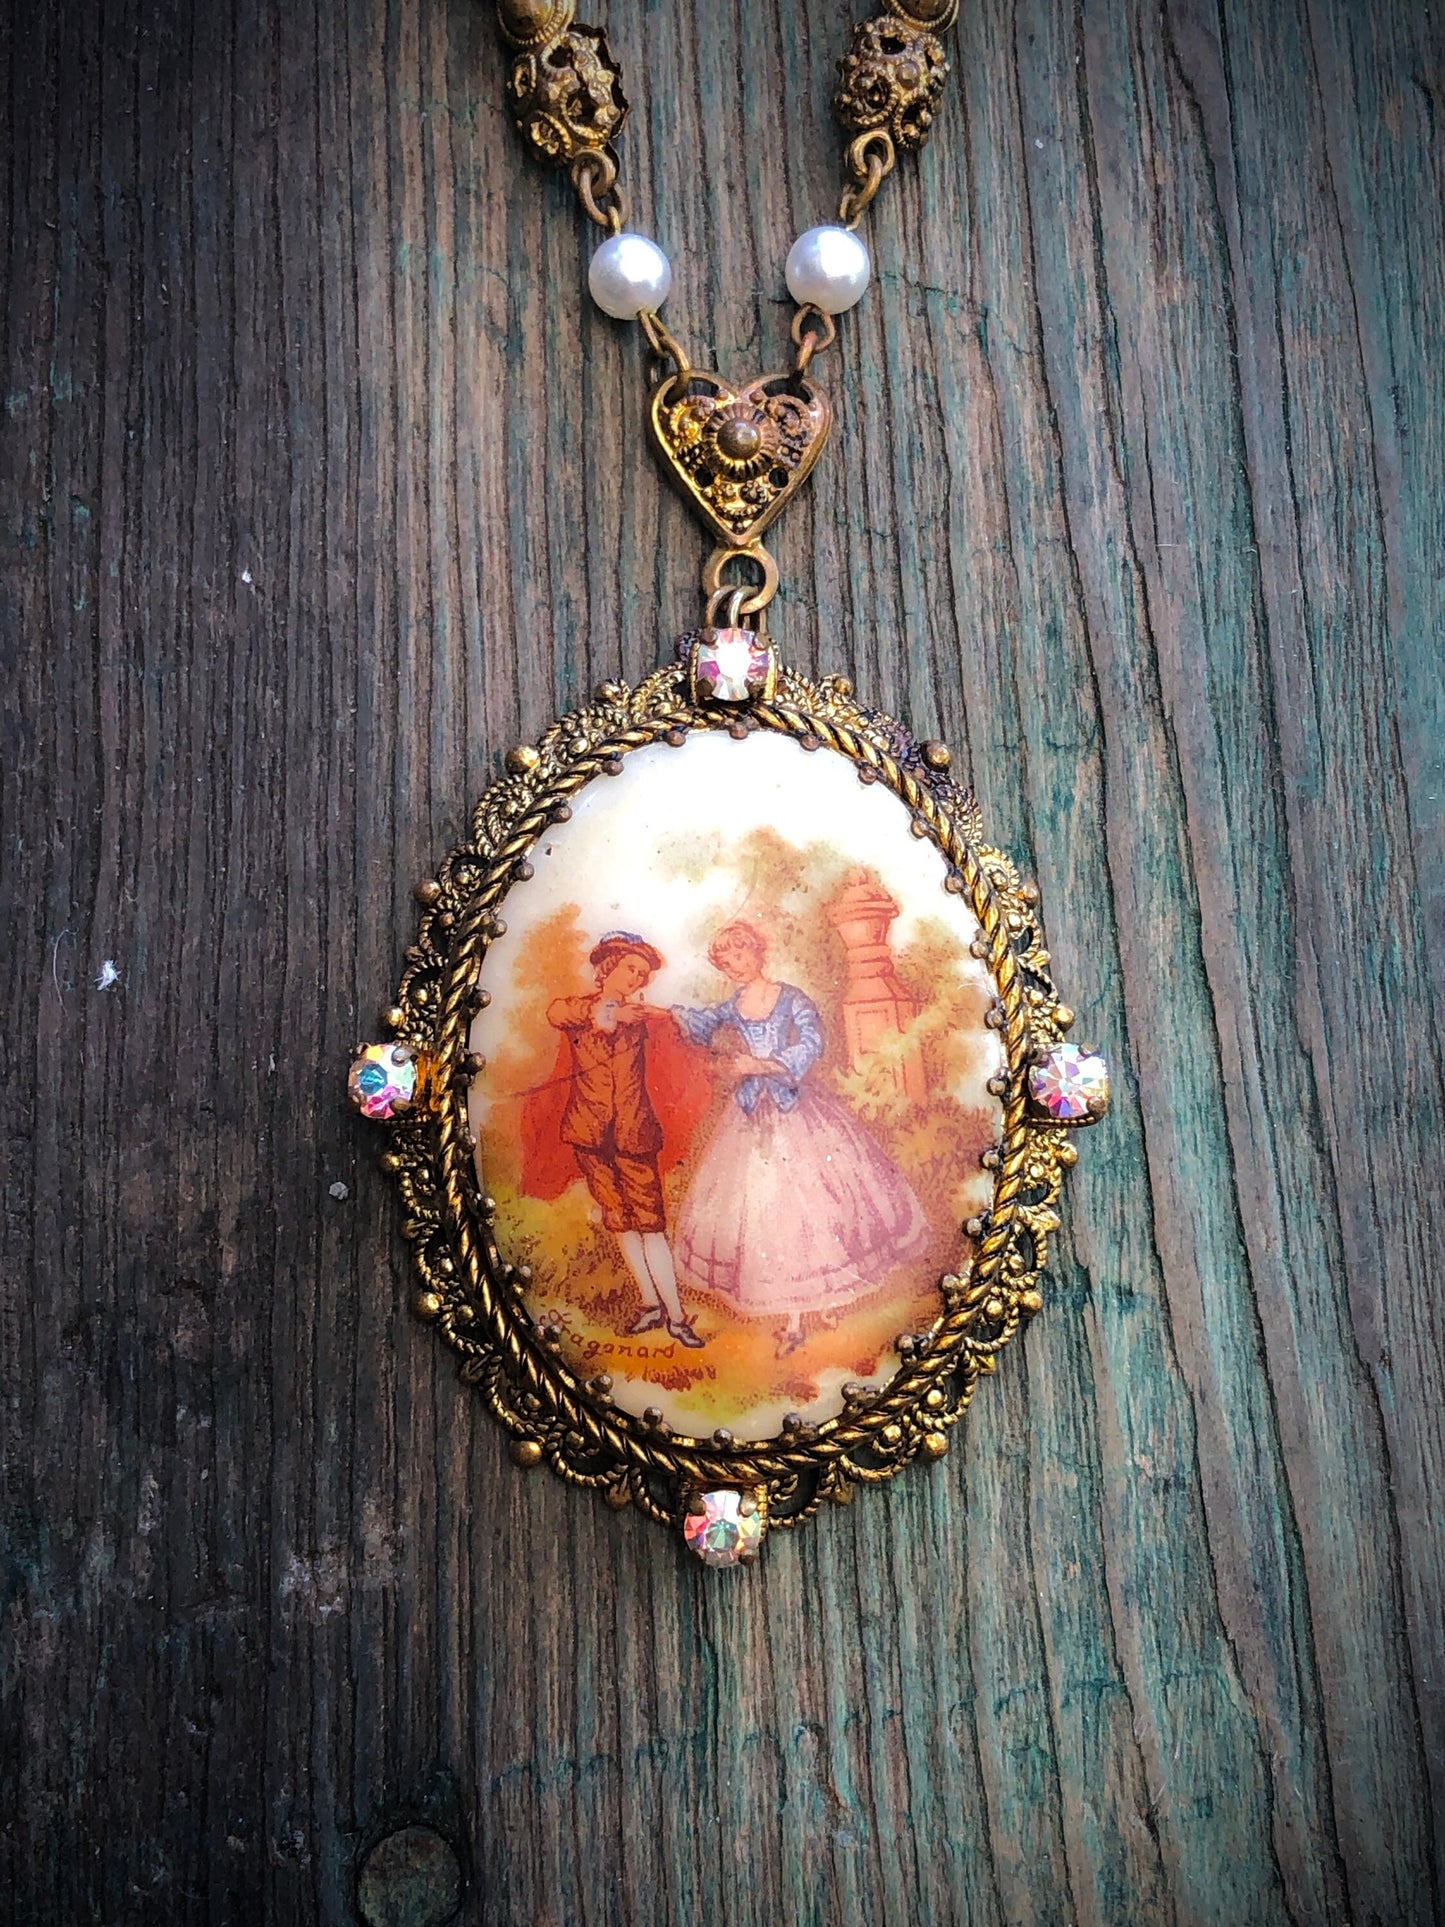 Vintage Signed Fragonard Courting Couple Limoge West German Gold Filigree Cameo Necklace with Aurora Borealis Crystal & Pearl